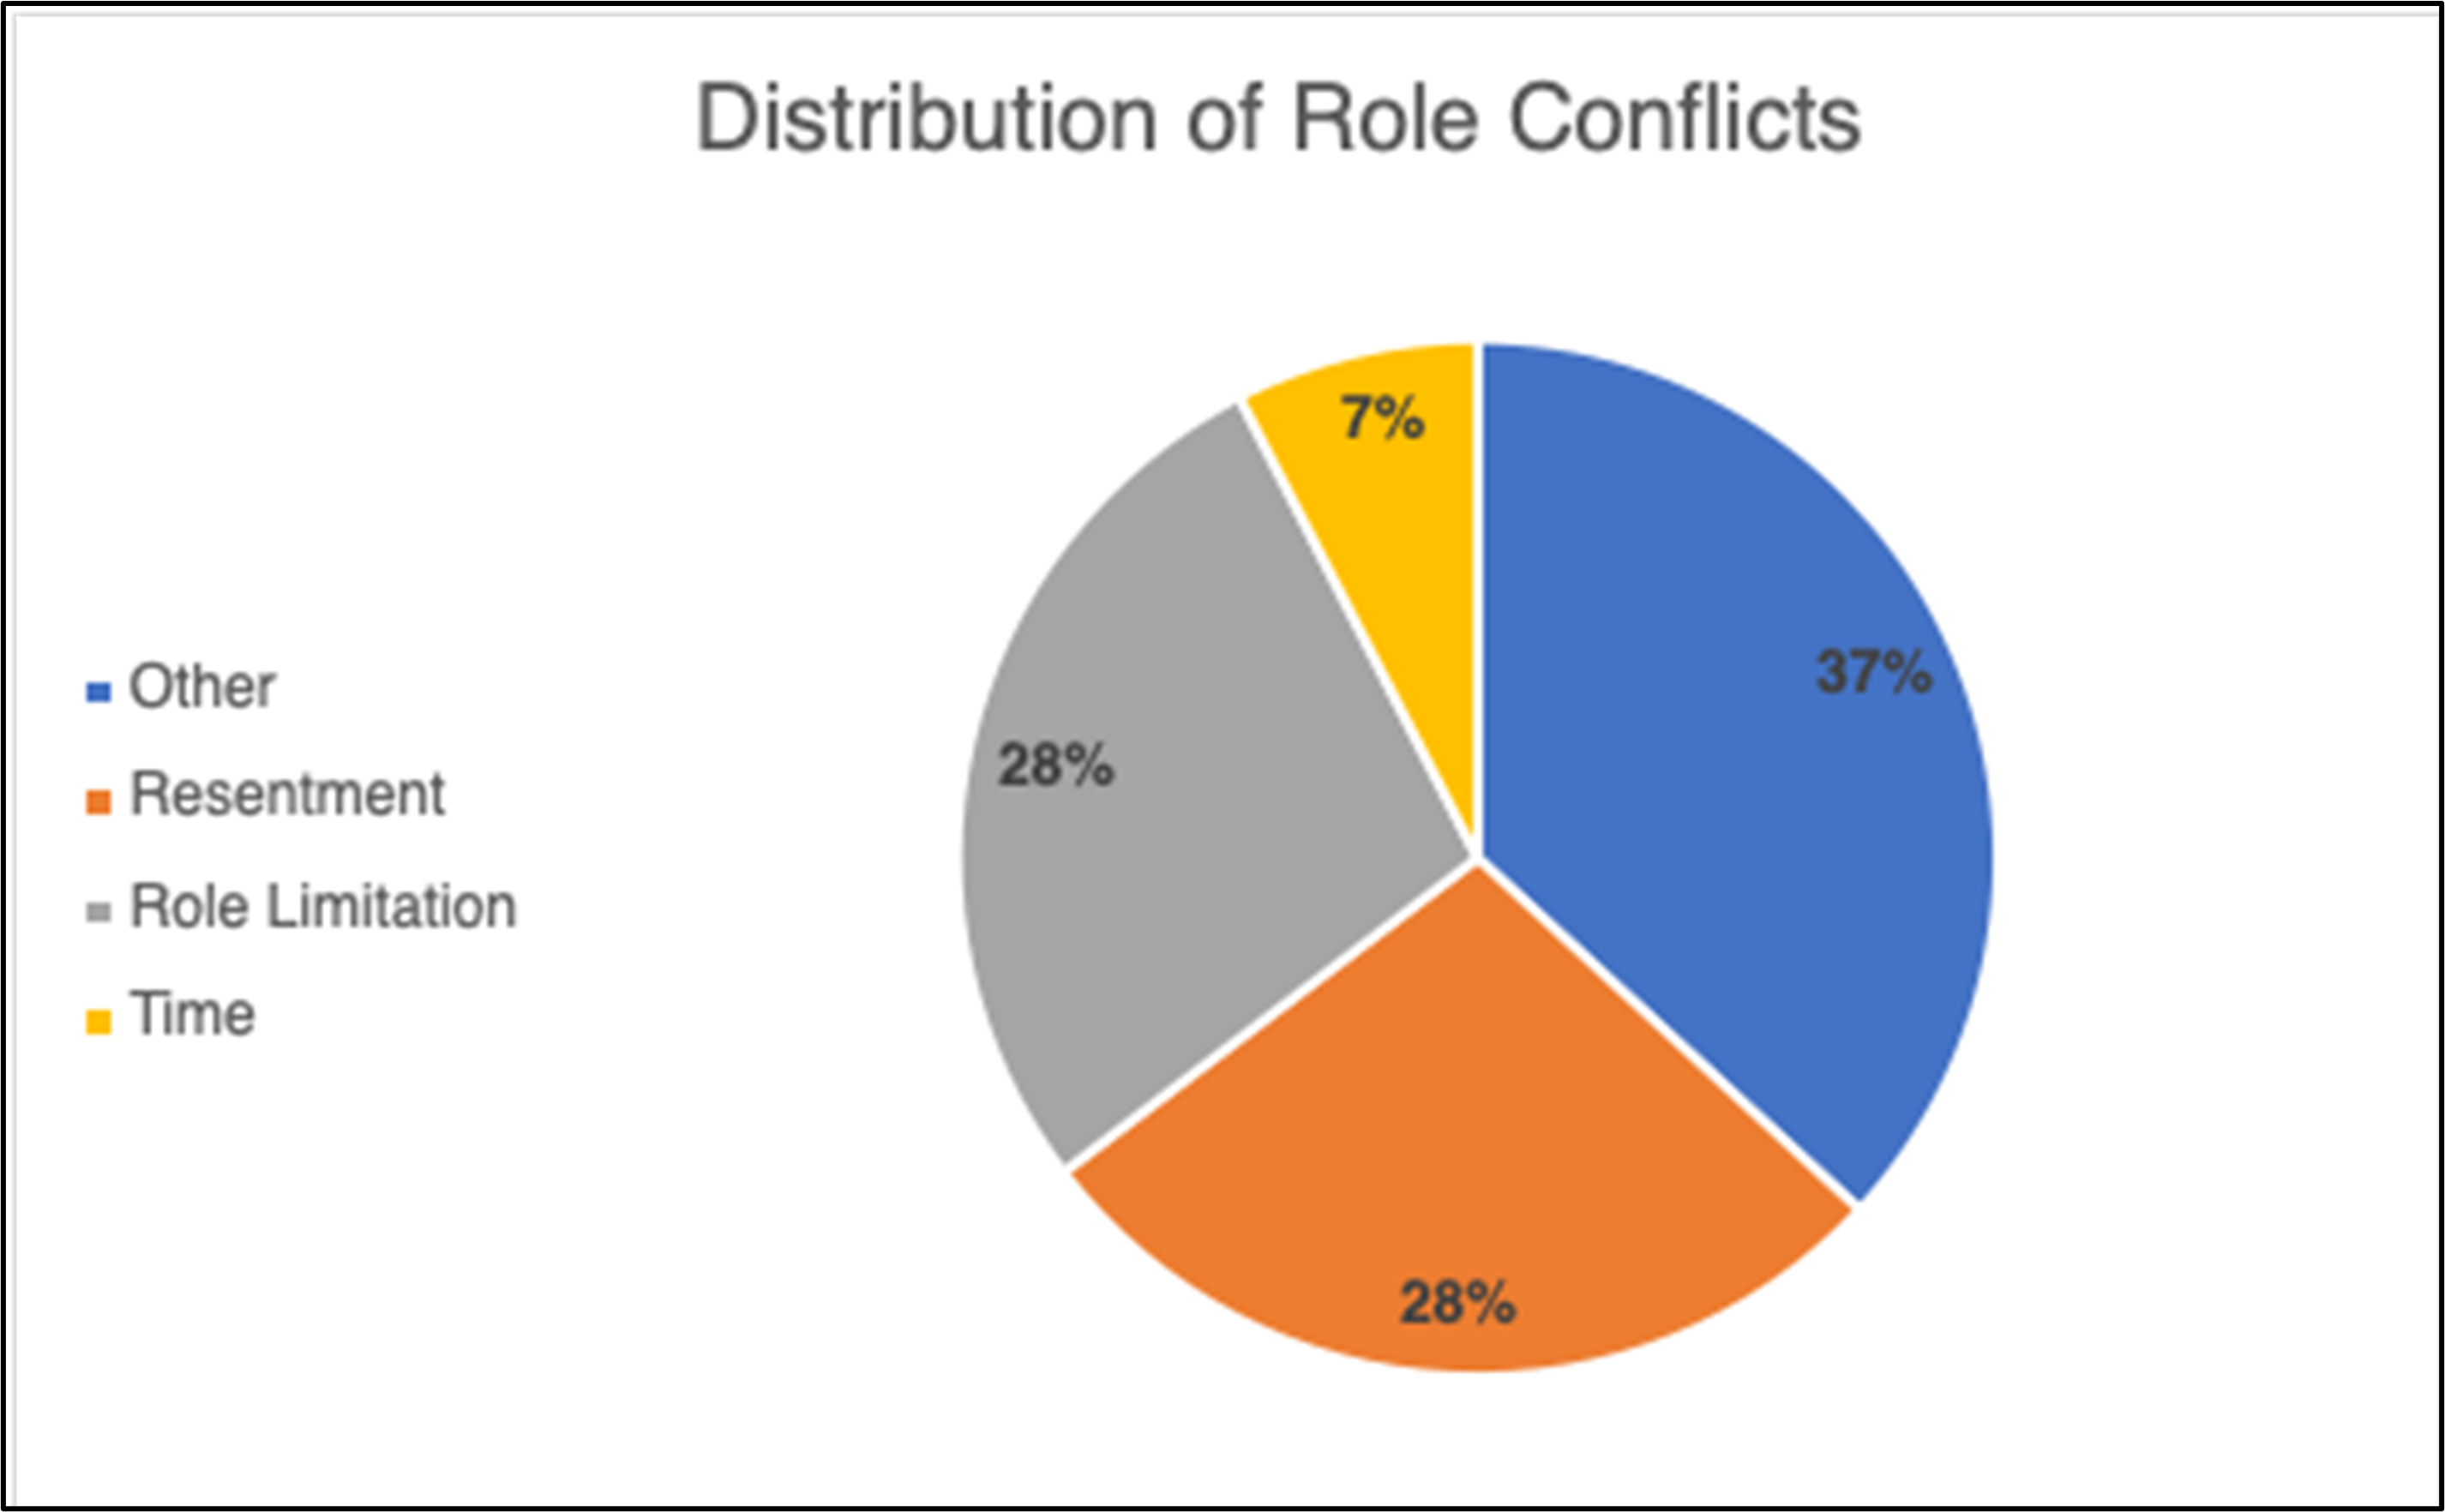 Pie chart showing the distribution of role conflict types articulated in the session notes including: resentment (28%), role limitation (28%), time constraints (7%), and other (37%). 